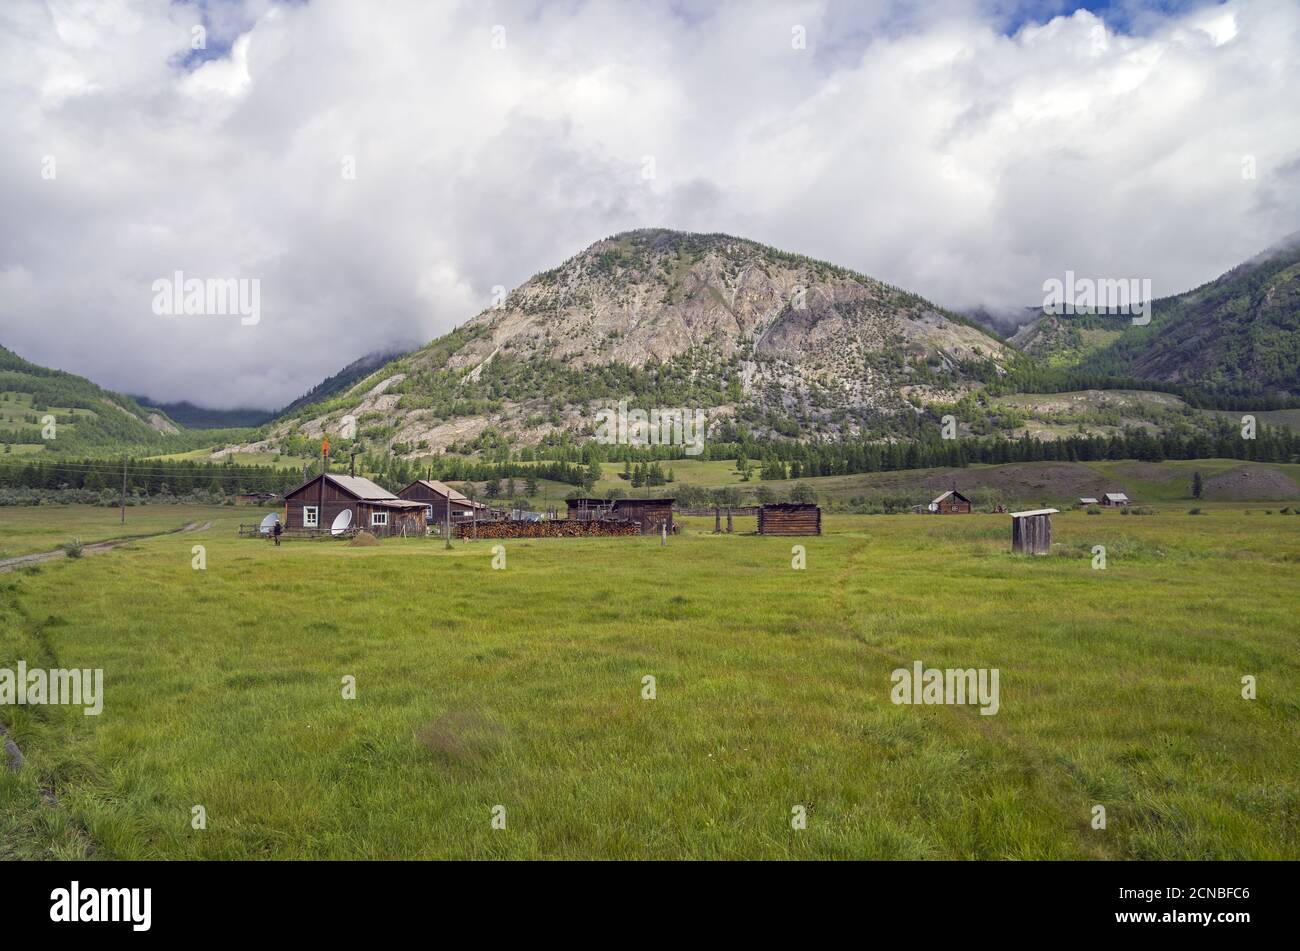 A small village in the mountains. Stock Photo